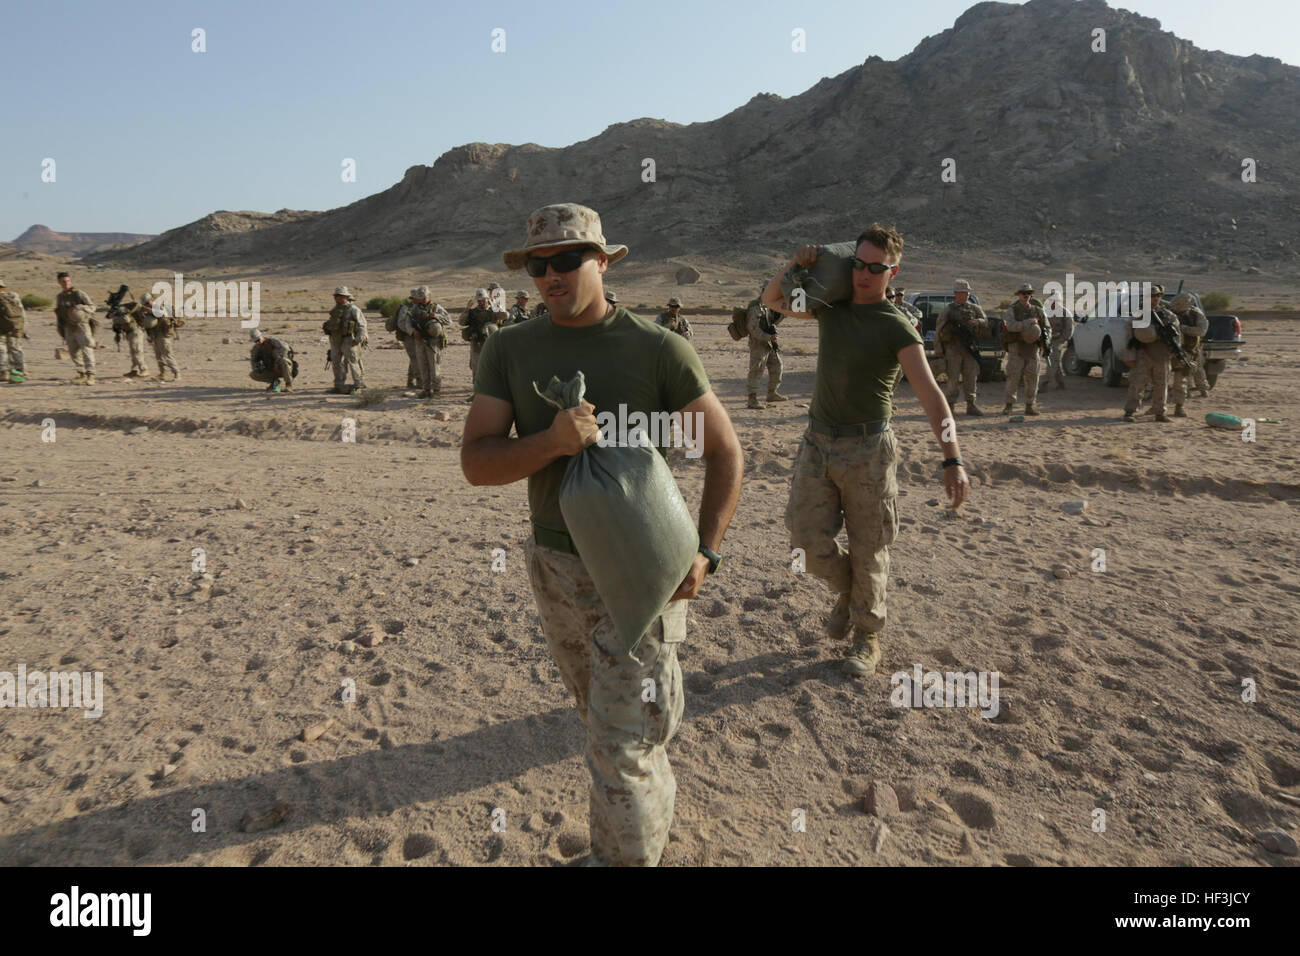 Southwest Asia (Aug. 18, 2015)  U.S. Marine Cpl. William Bowling, left, and Lance Cpl. James White carry sand bags during a range setup. Bowling is a radio operator and White is a rifleman with India Company, Battalion Landing Team 3rd Battalion, 1st Marine Regiment, 15th Marine Expeditionary Unit. The 15th MEU is deployed throughout Southwest Asia to maintain regional security in the U.S. 5th Fleet area of operations.  The 15th MEU provides flexible, responsive options across the range of military operations to support regional security in the U.S. 5th Fleet AOR. (U.S. Marine Corps photo by S Stock Photo